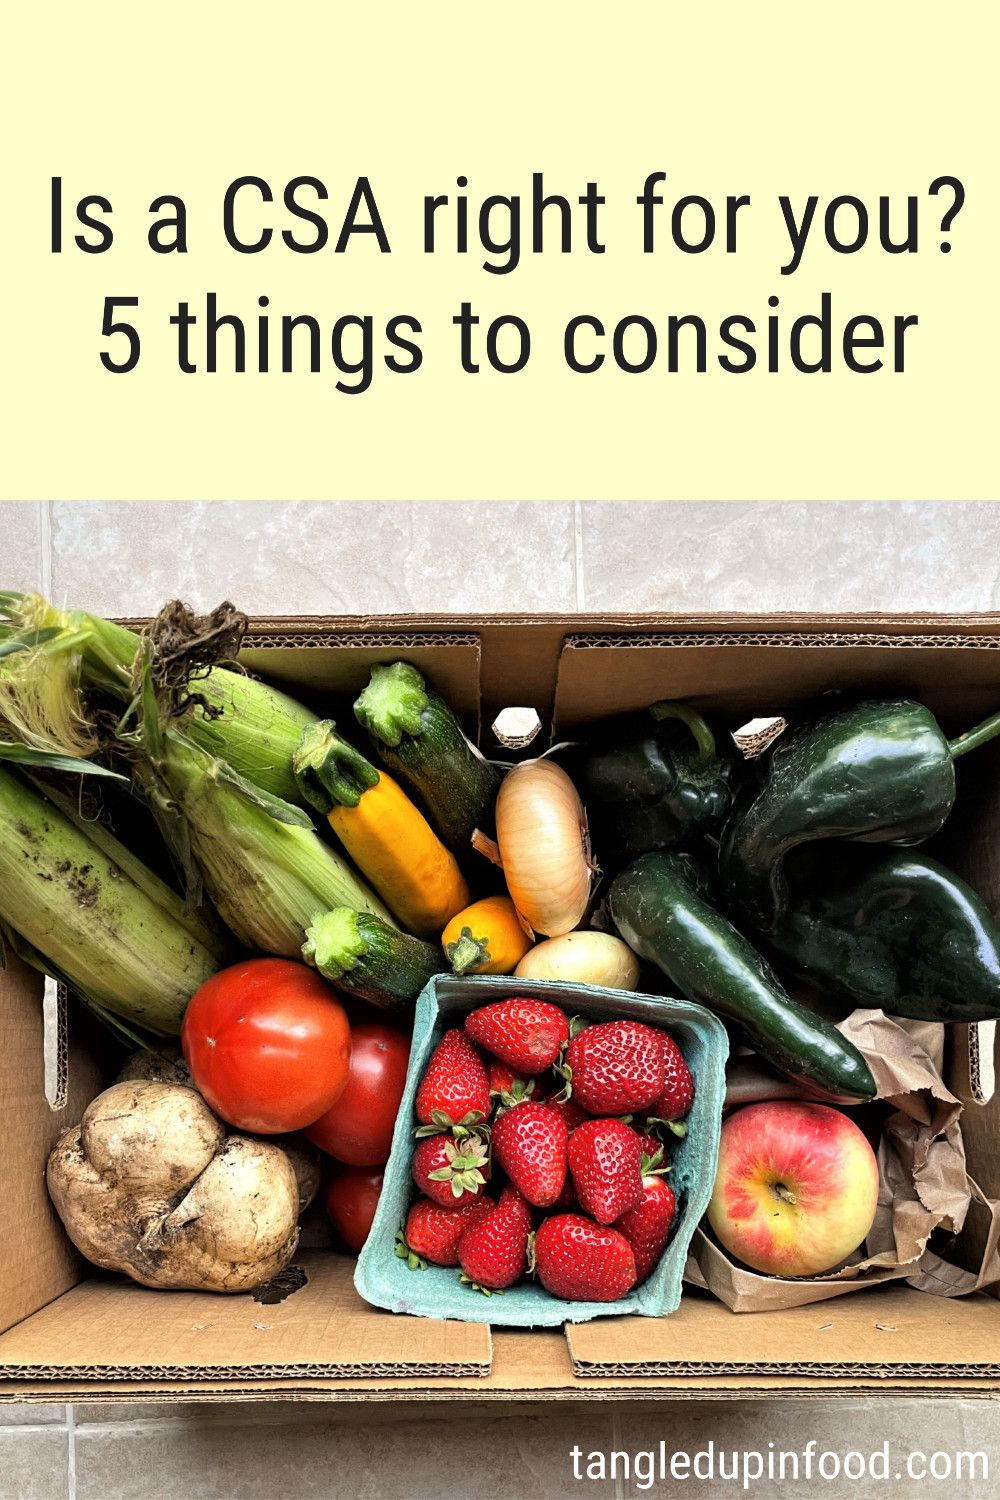 Box of produce with text reading "Is a CSA right for you? 5 things to consider"